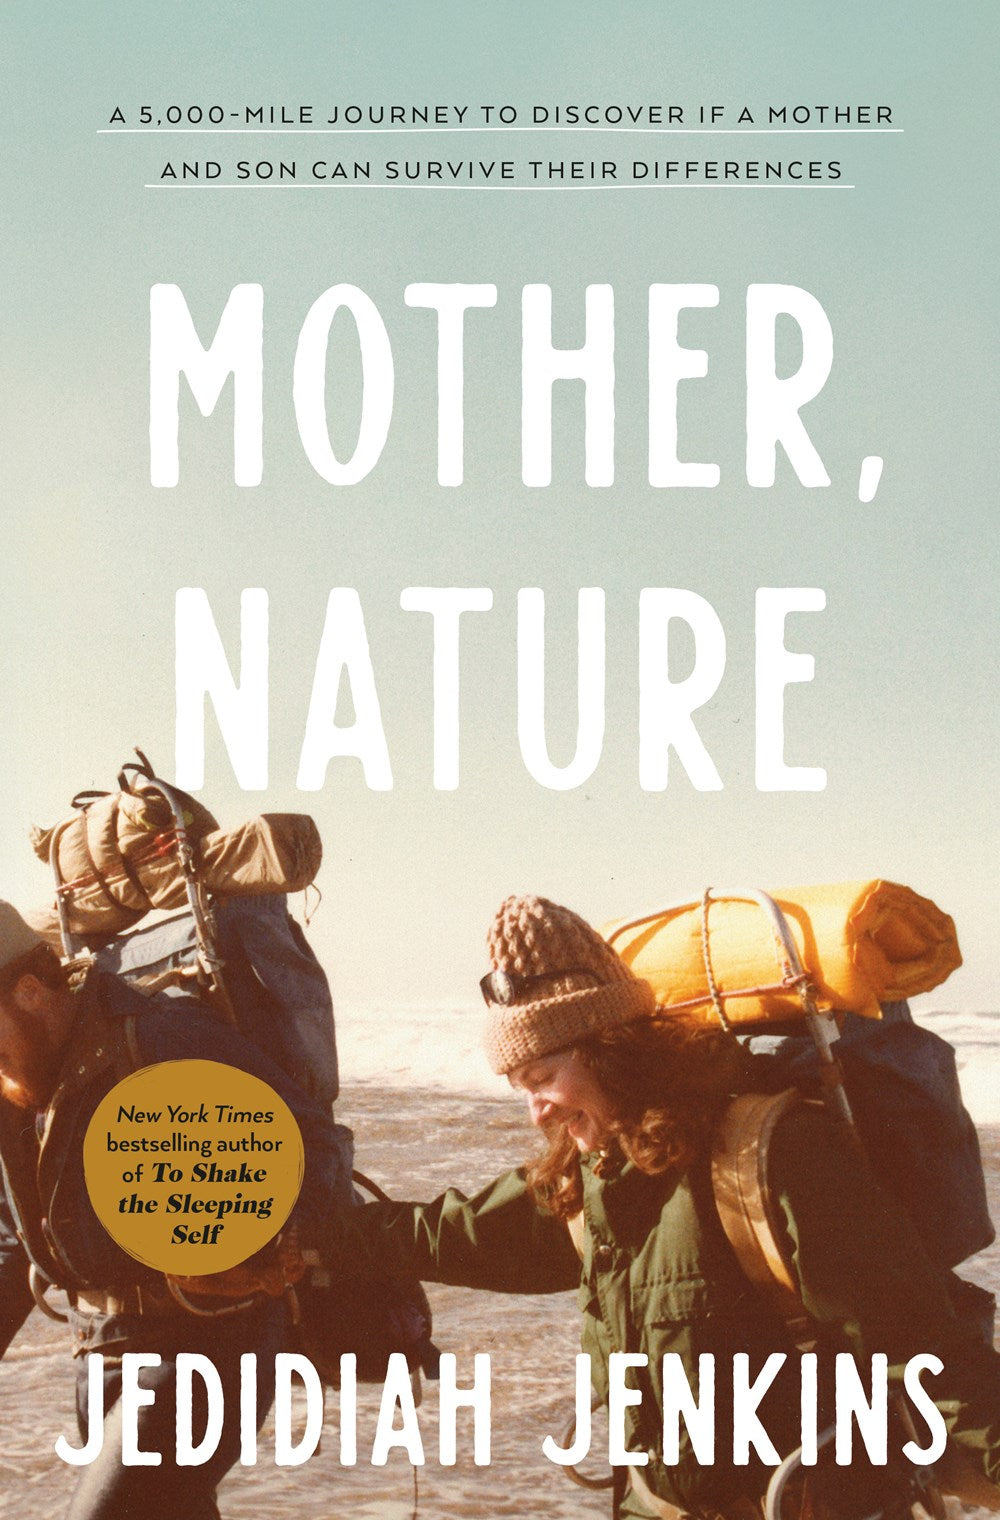 Mother Nature: A 5,000 Mile Journey to Discover if a Mother and Son Can Survive Their Differences by Jedidiah Jenkins (11/7/23)